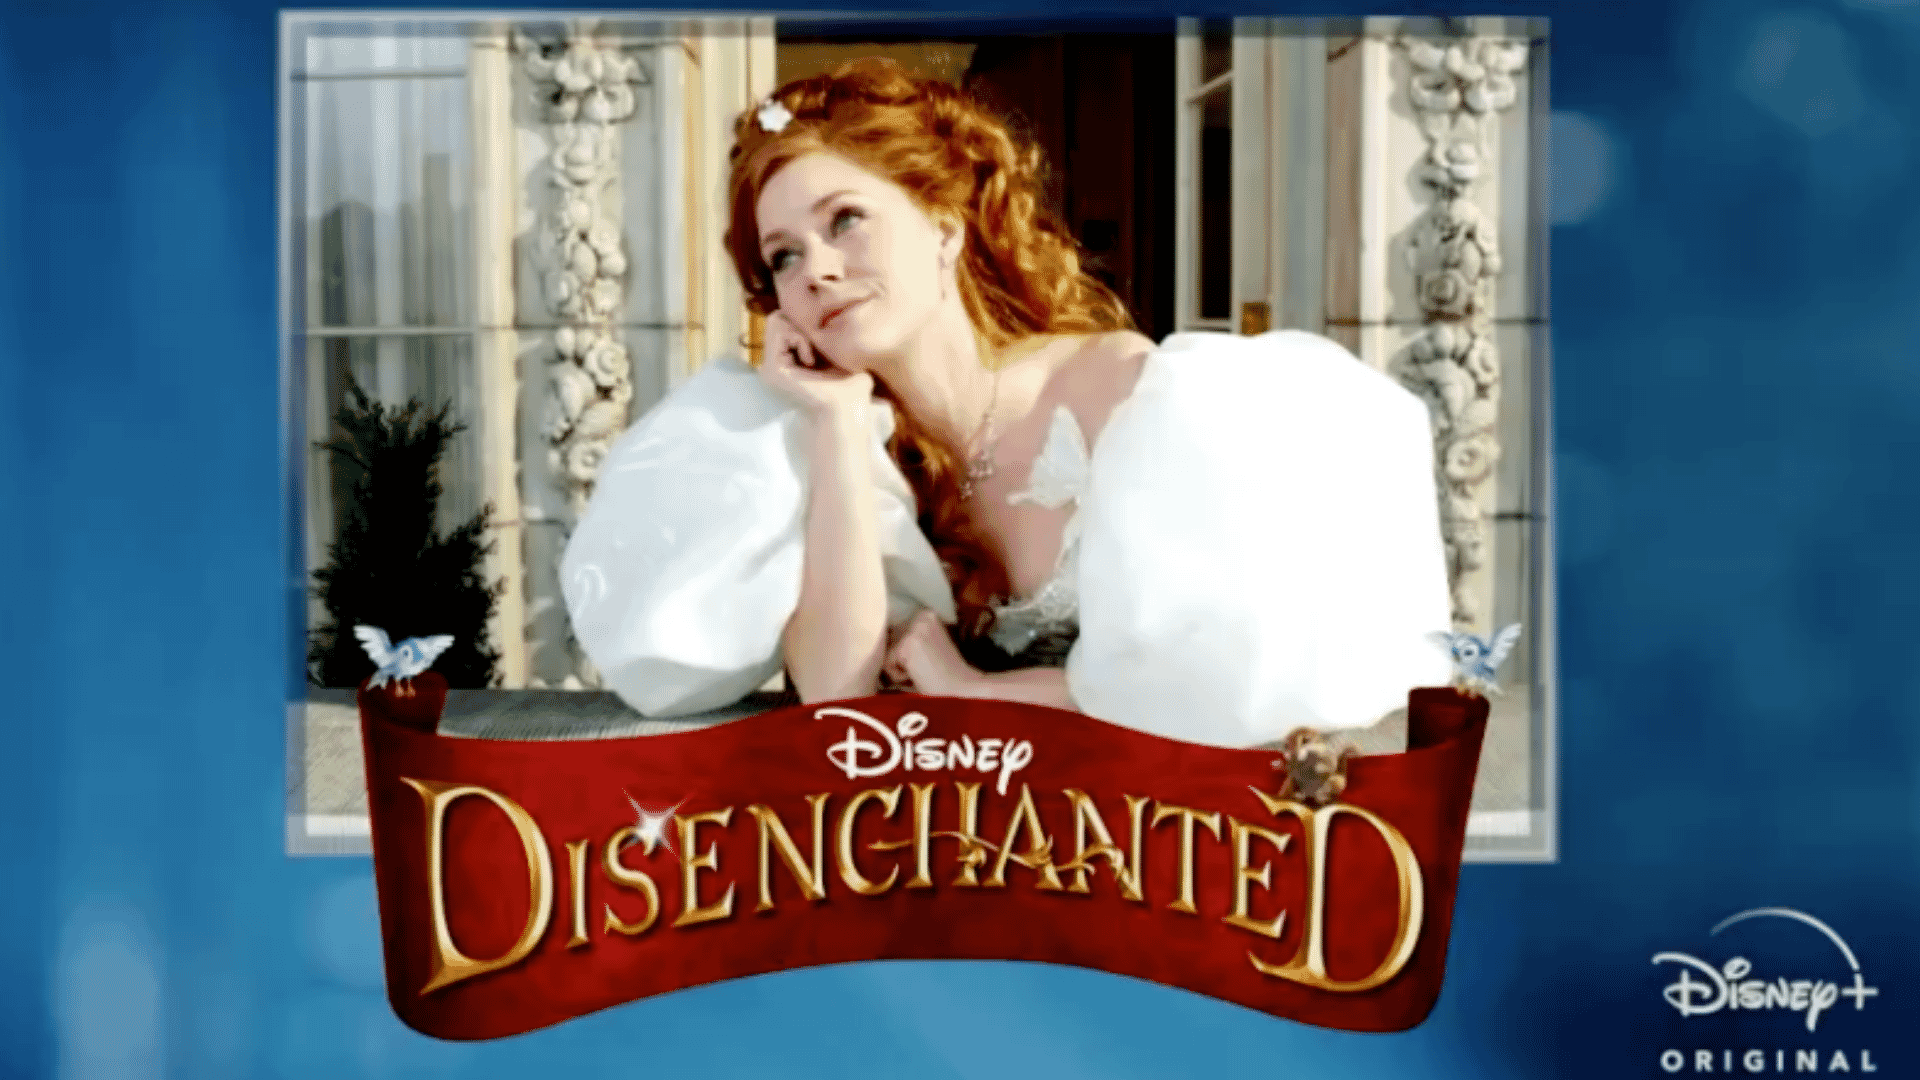 Amy Adams Speaks about Dancing in Her 40s for Upcoming Film 'Disenchanted'